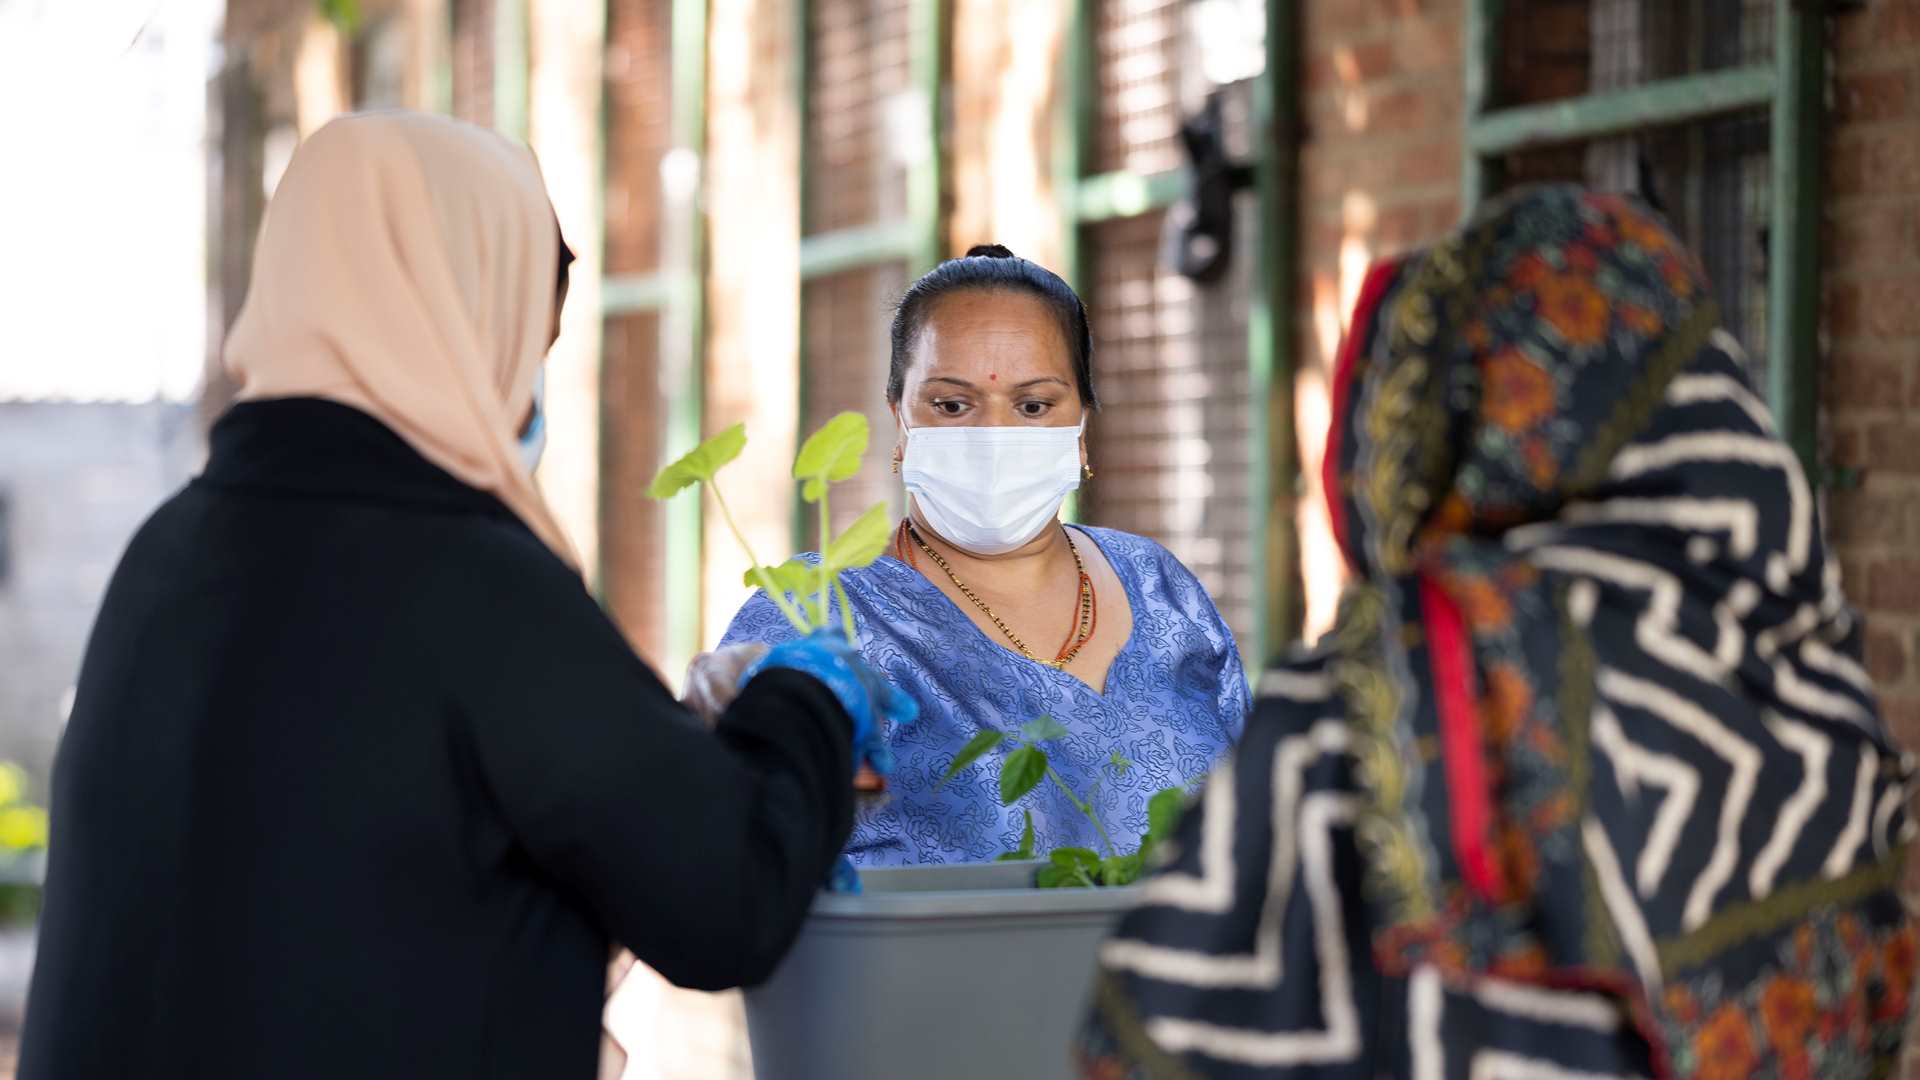 A woman in a face mask handing out plants to community members